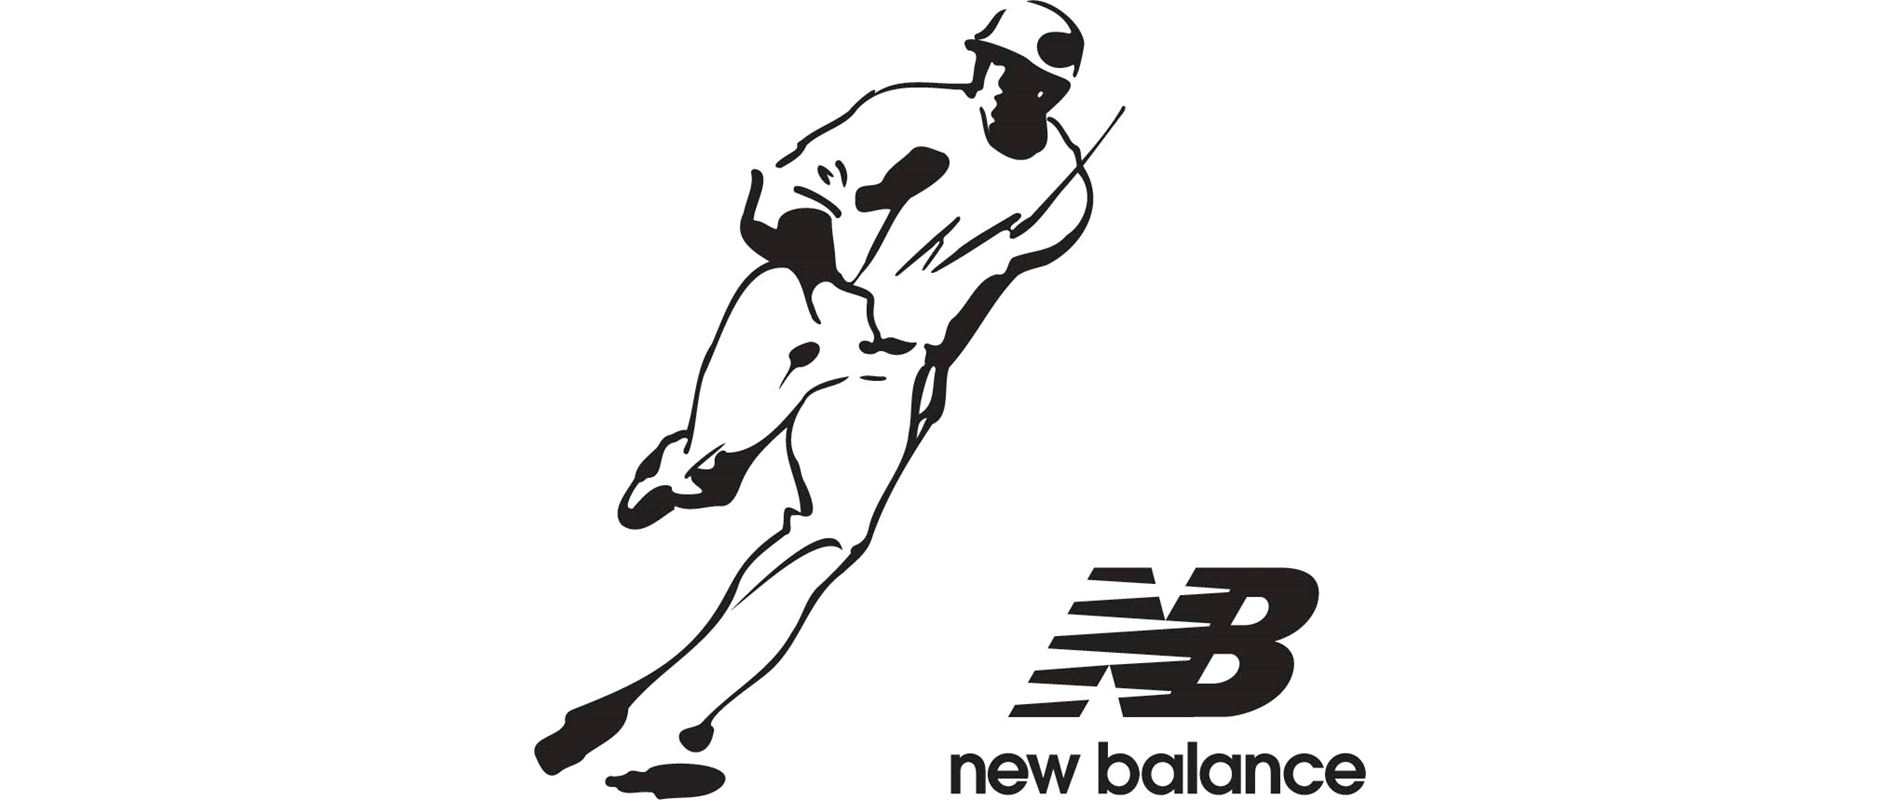 NEW BALANCE AND SHOHEI OHTANI UNVEIL LOGO AHEAD OF SEASON START Boston MA March 18 2024 Today New Balance and Shohei Ohtani officially revealed the two time American League MVP s logo at the start of the MLB World Tour Seoul Series presented by Coupang Play As the only player in MLB history to receive multiple American League MVP titles through a unanimous vote Shohei continues to break records in baseball and bring new fans to the sport Shohei s logoshows his athleticism and unique ability as a hitter and pitcher marking a significant moment in an already historic career Shohei s love of the game is most evident in his base running and his logo is a sketch of him rounding first base a nod to his base running ability which further highlights his dominance in the sport To finally reveal this special logo that I ve worked closely on is truly an exciting moment for me says Shohei It is a visual representation of my journey in baseball and I am excited to share it